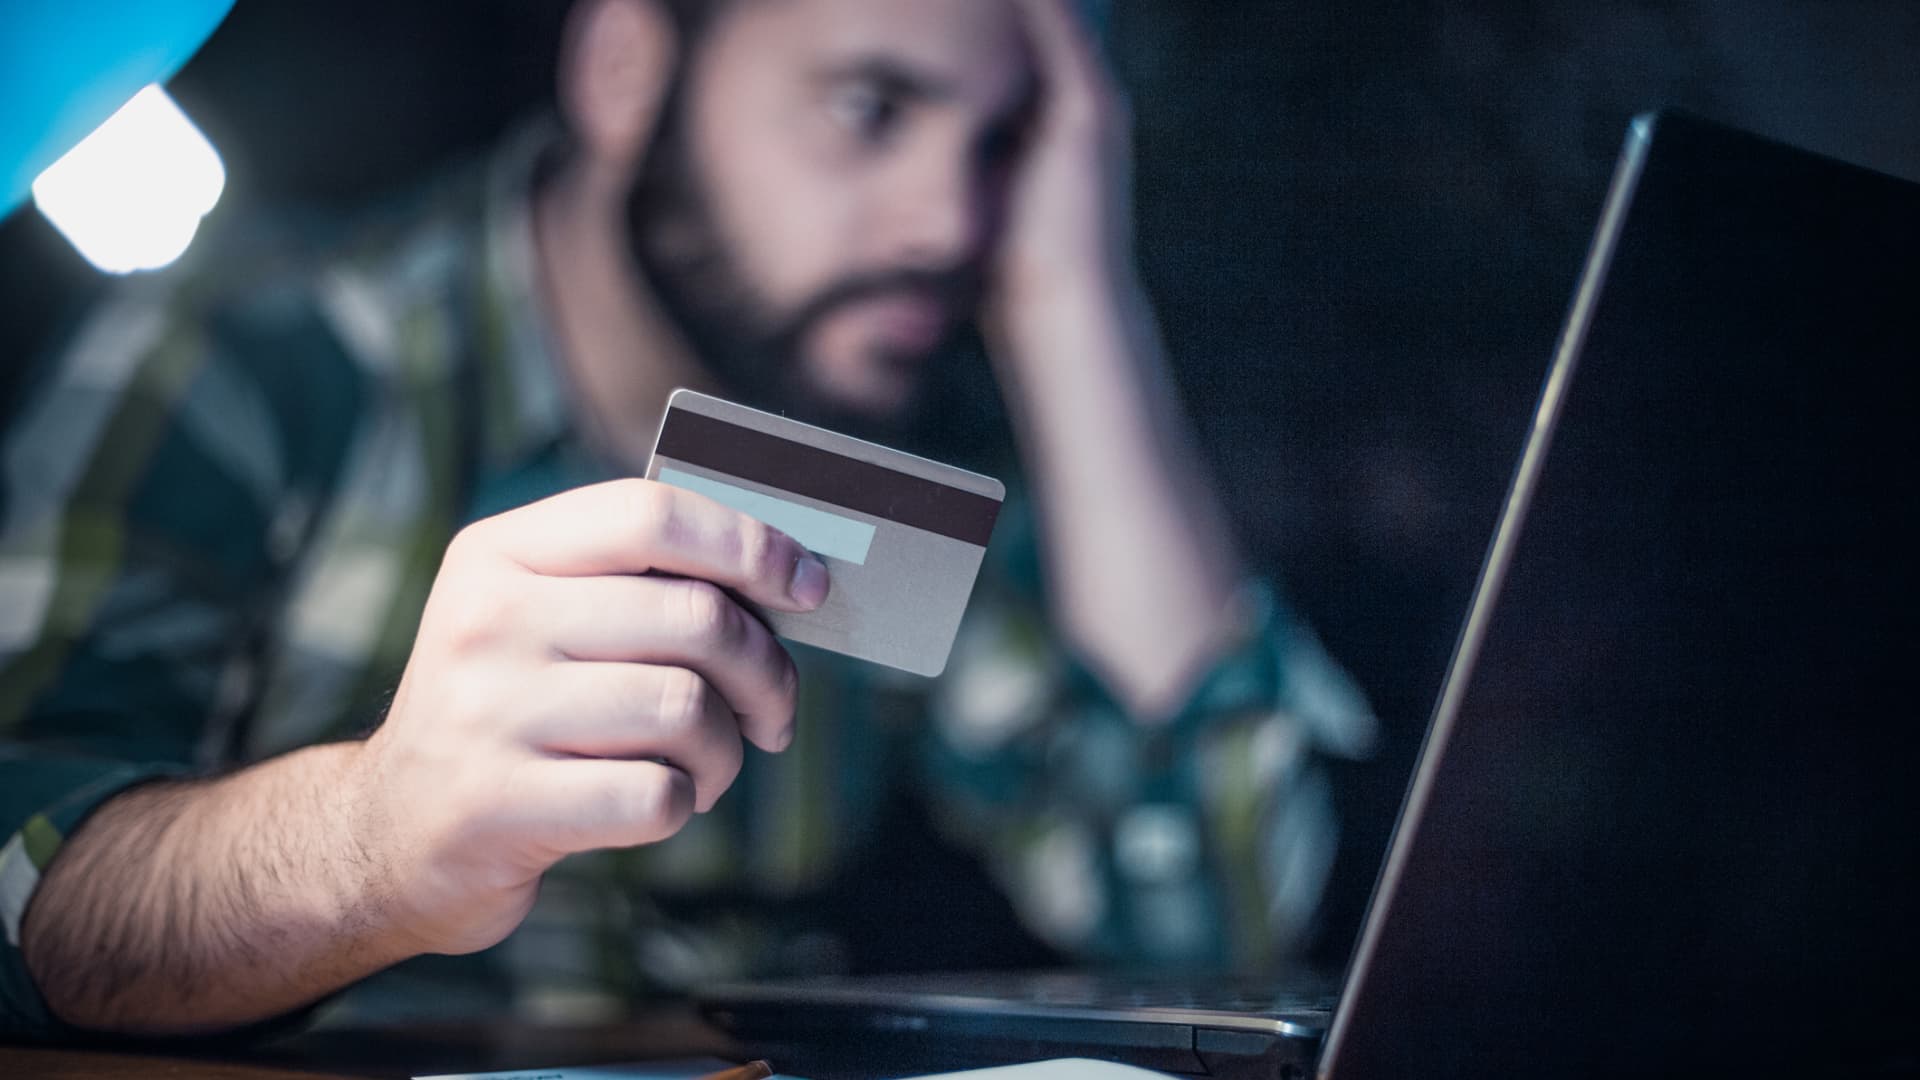 Nearly 20% of Americans are afraid to check their credit card statements as interest rates approach an all-time high